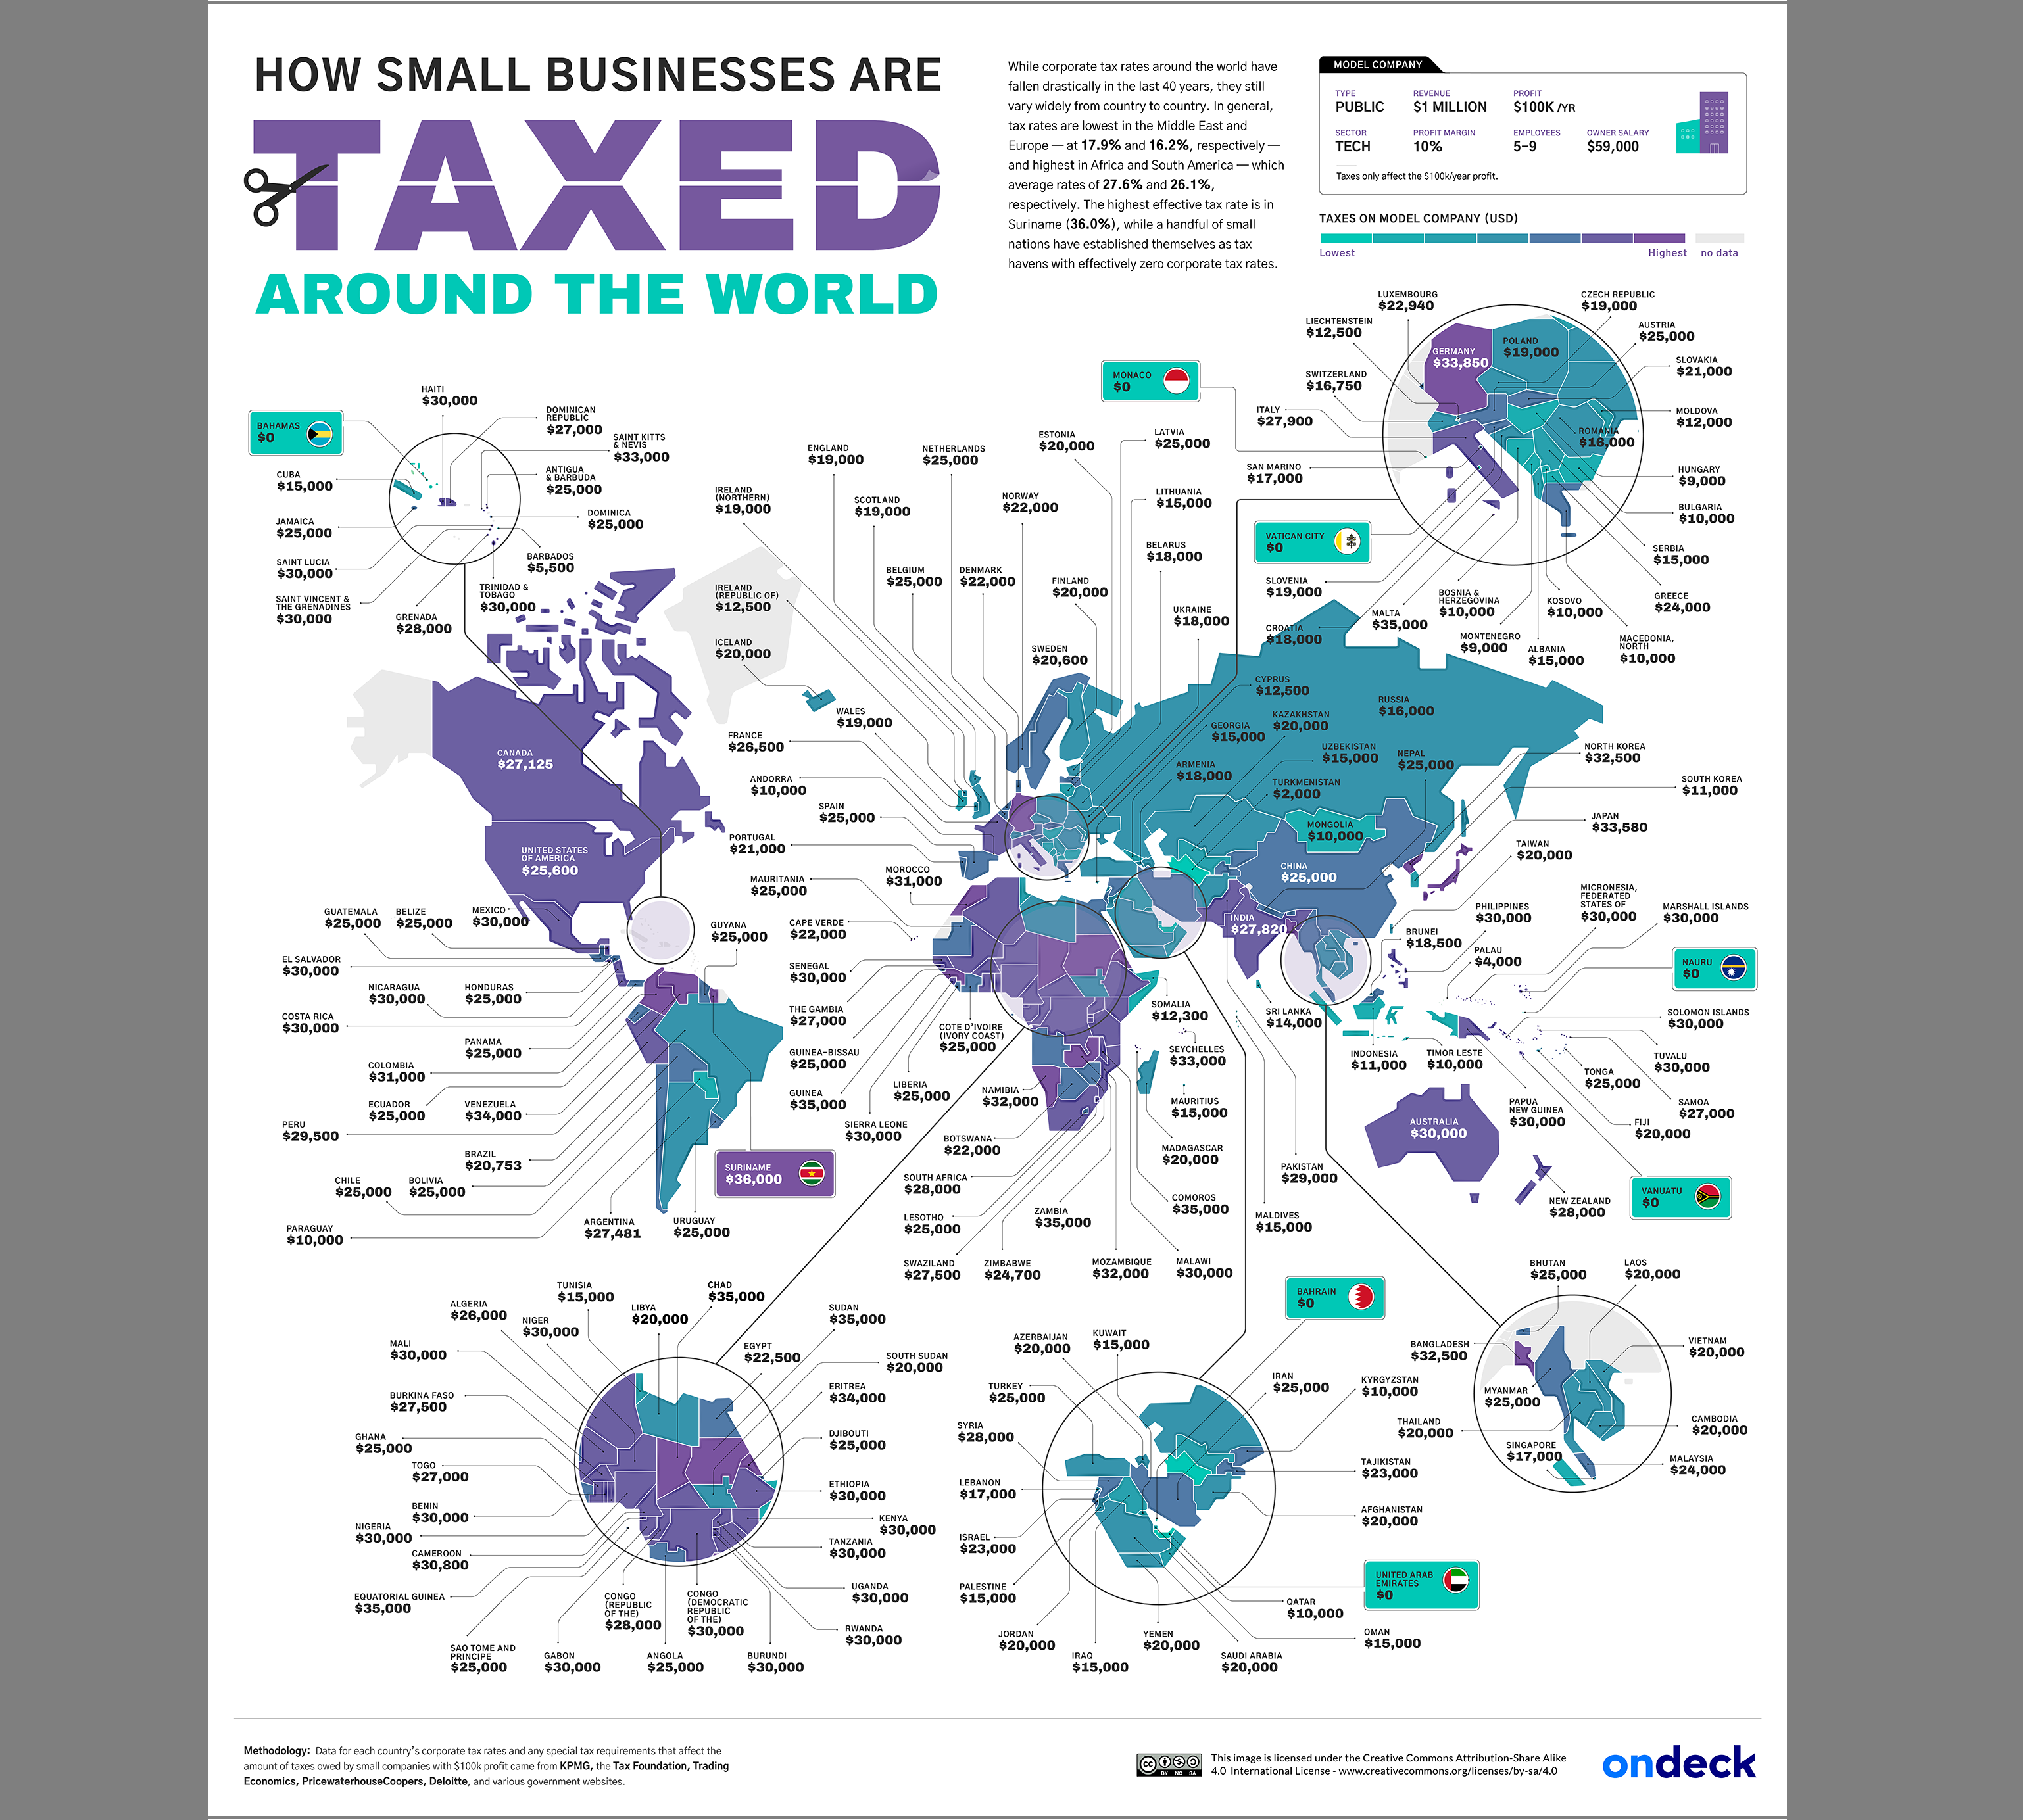 How Small Businesses Are Taxed in Every Country